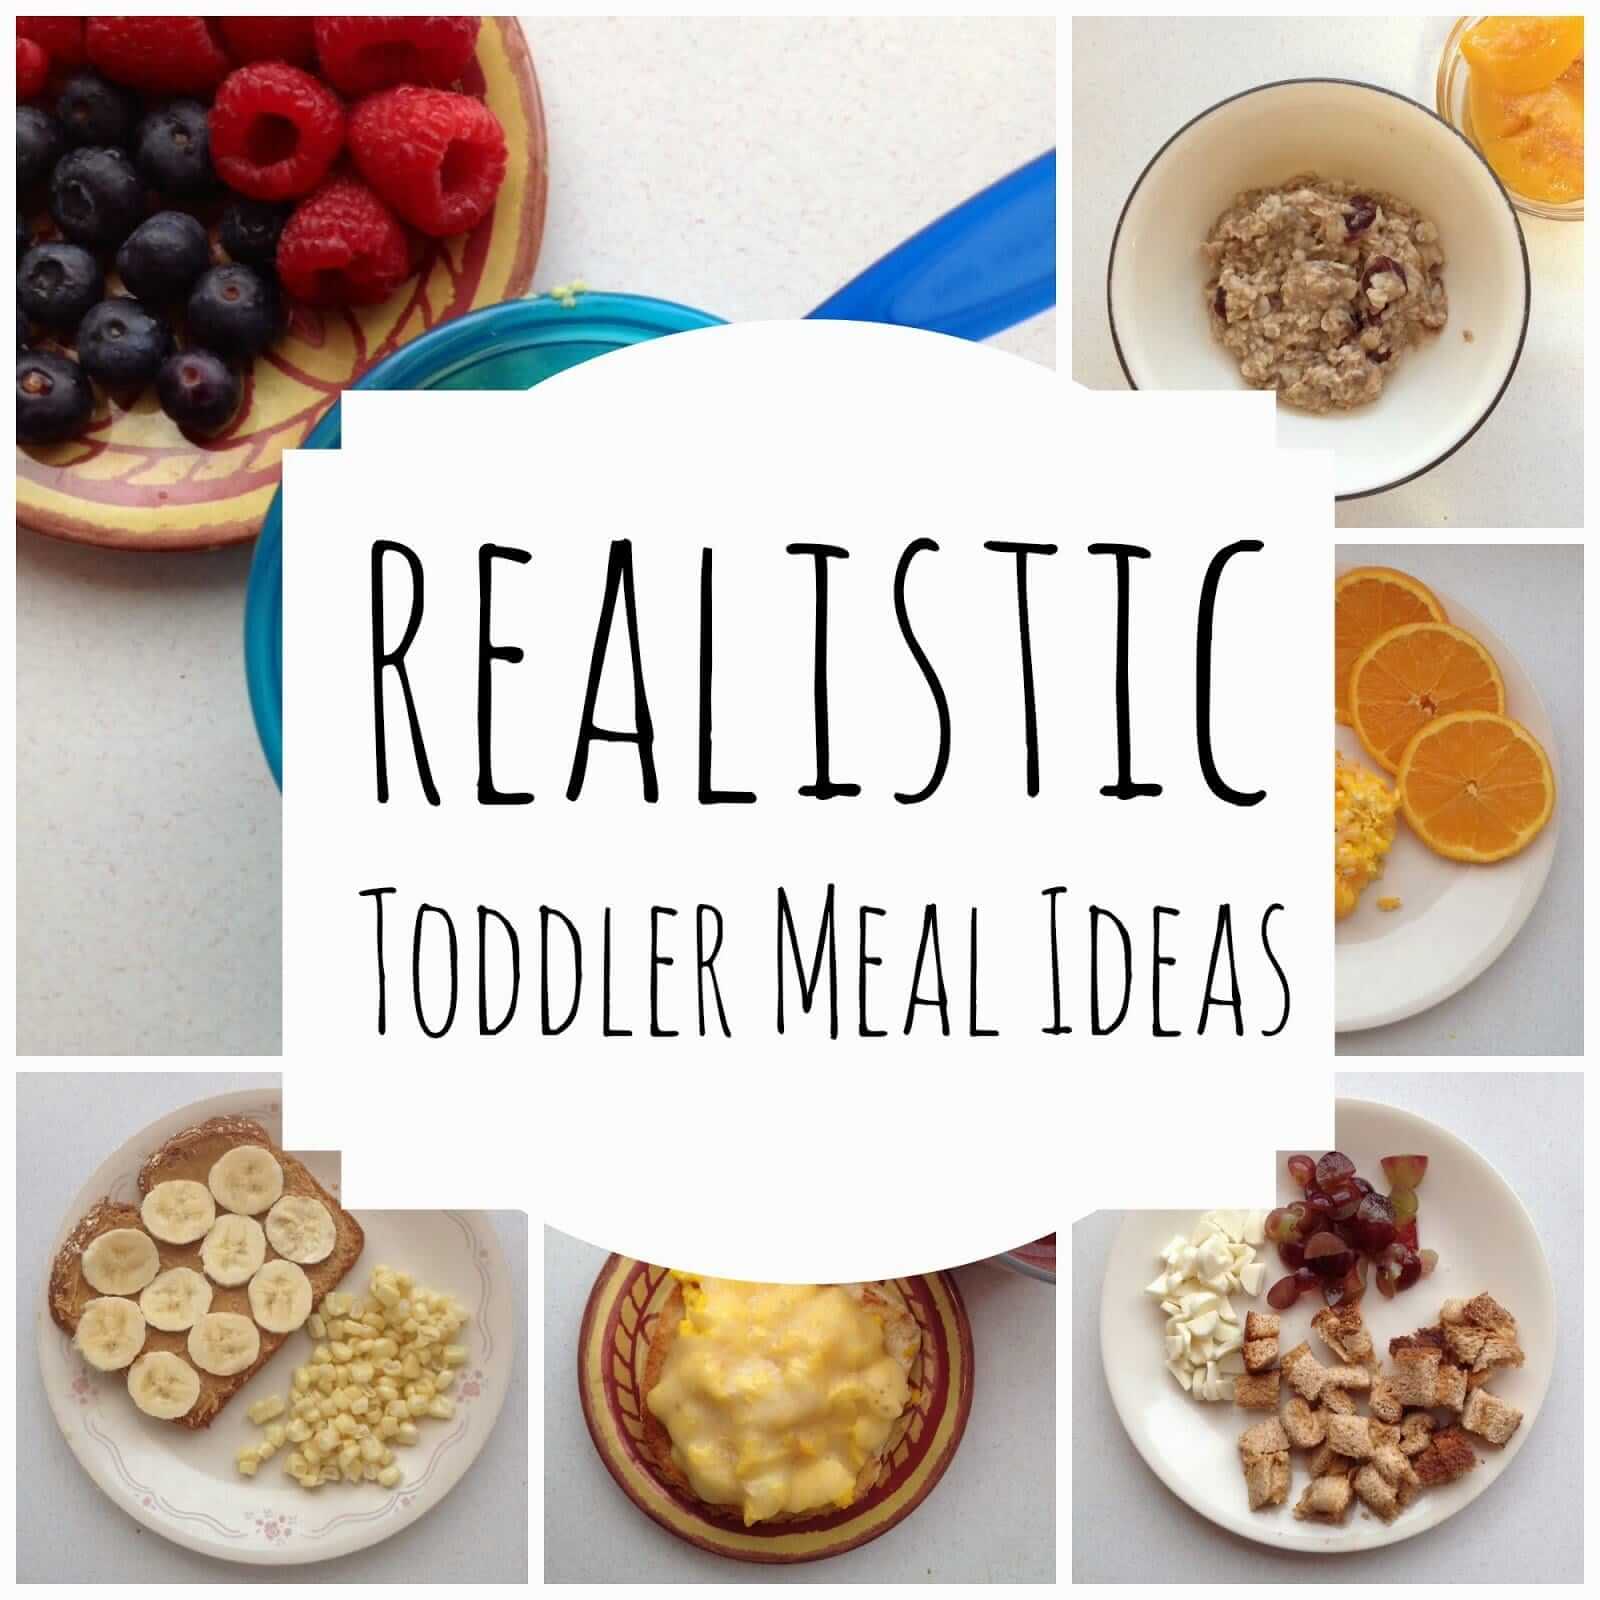 Realistic Toddler Meal Ideas - Lou Lou Girls